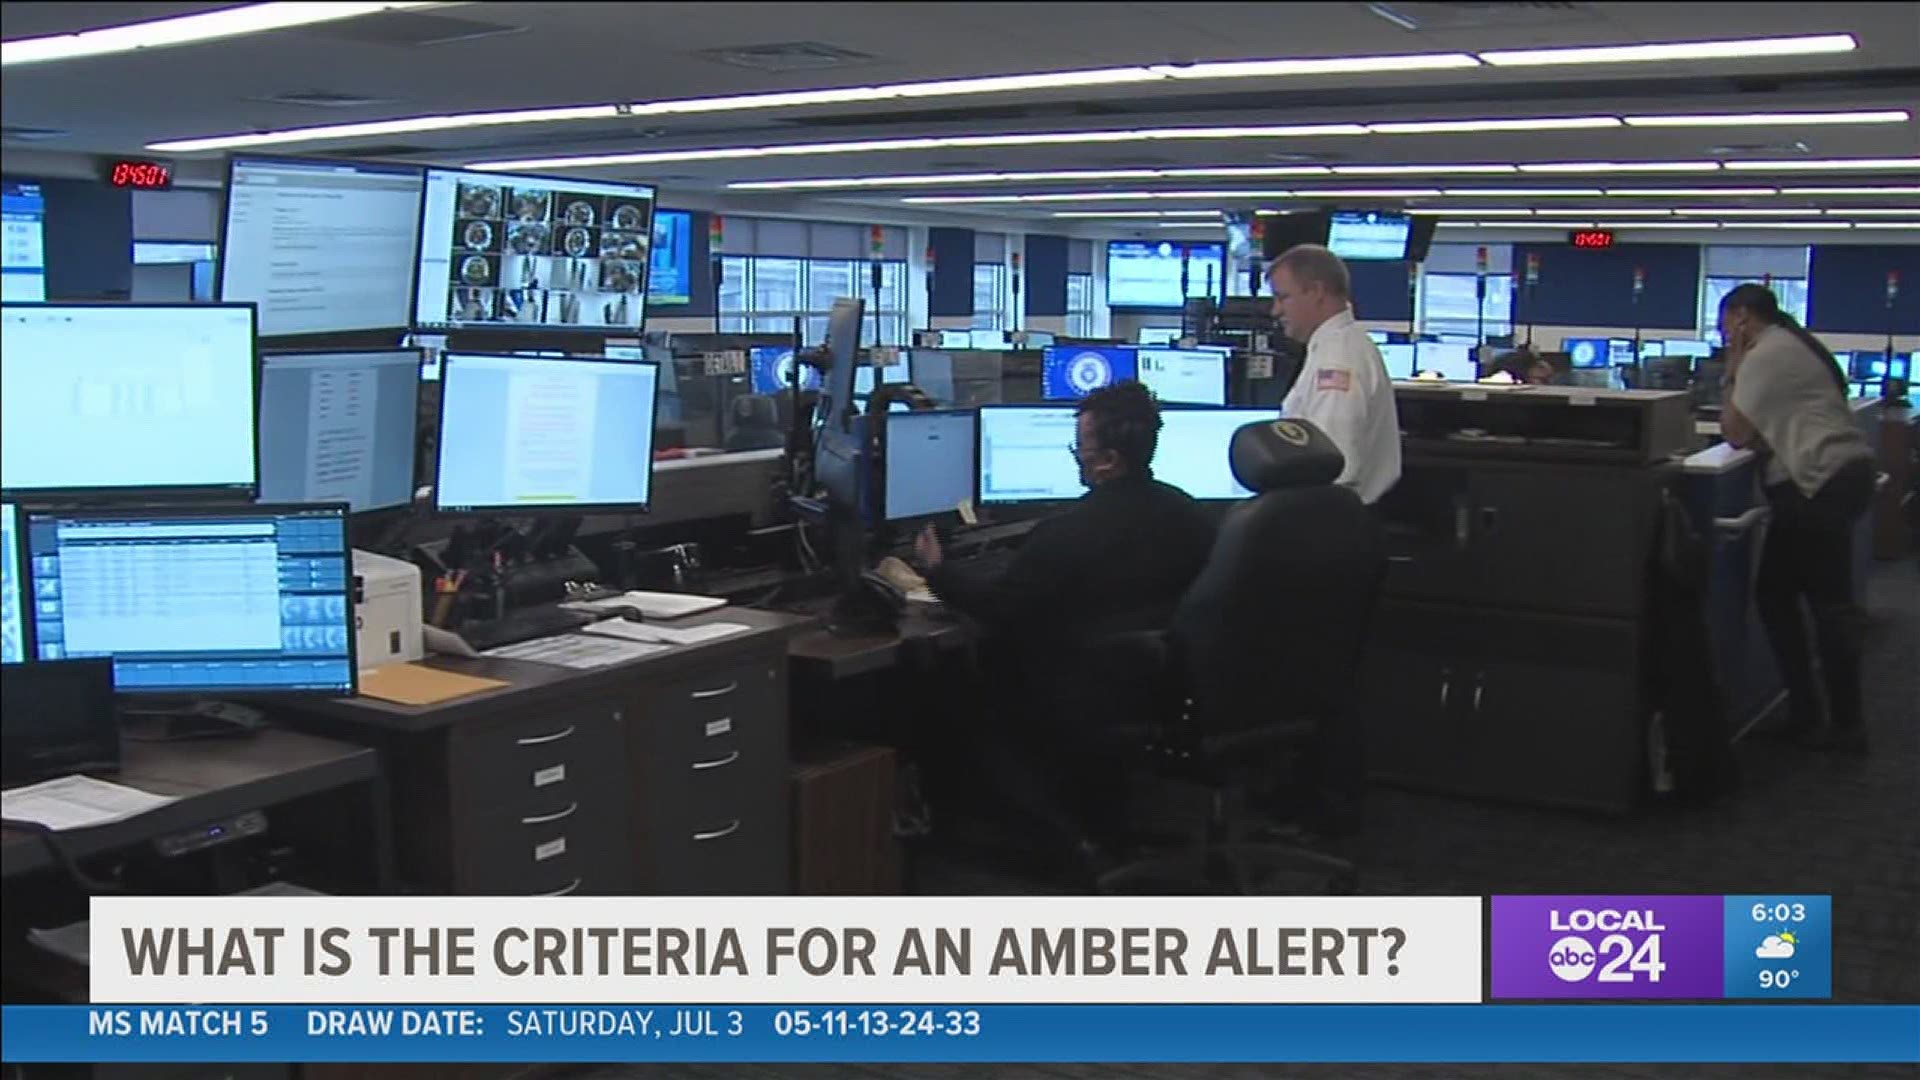 "I'm curious as to what is the criteria for Amber Alerts. I see stories of missing kids on the local news that we never receive Amber Alerts for, please explain."